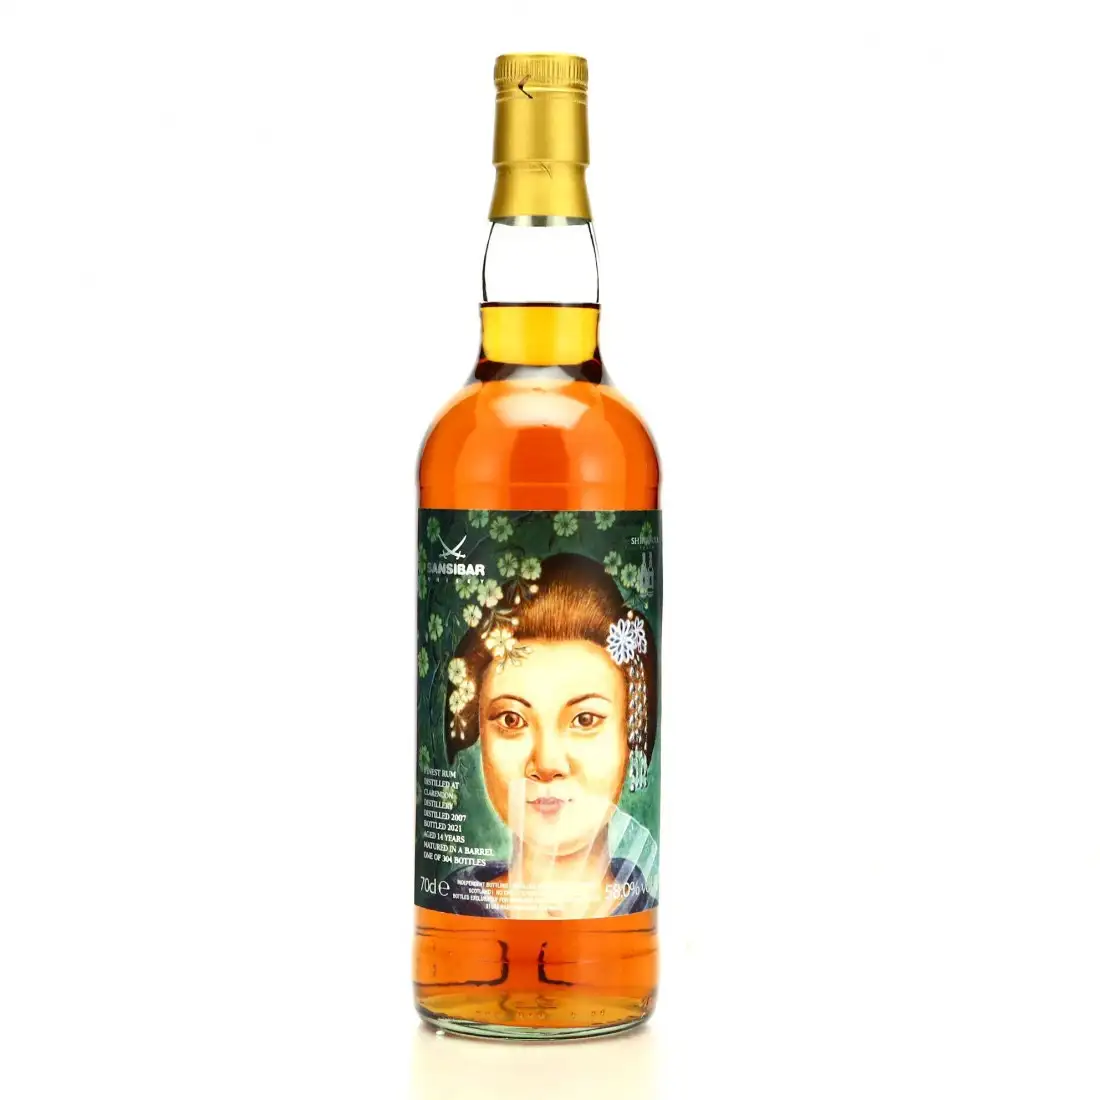 Image of the front of the bottle of the rum Geisha Label